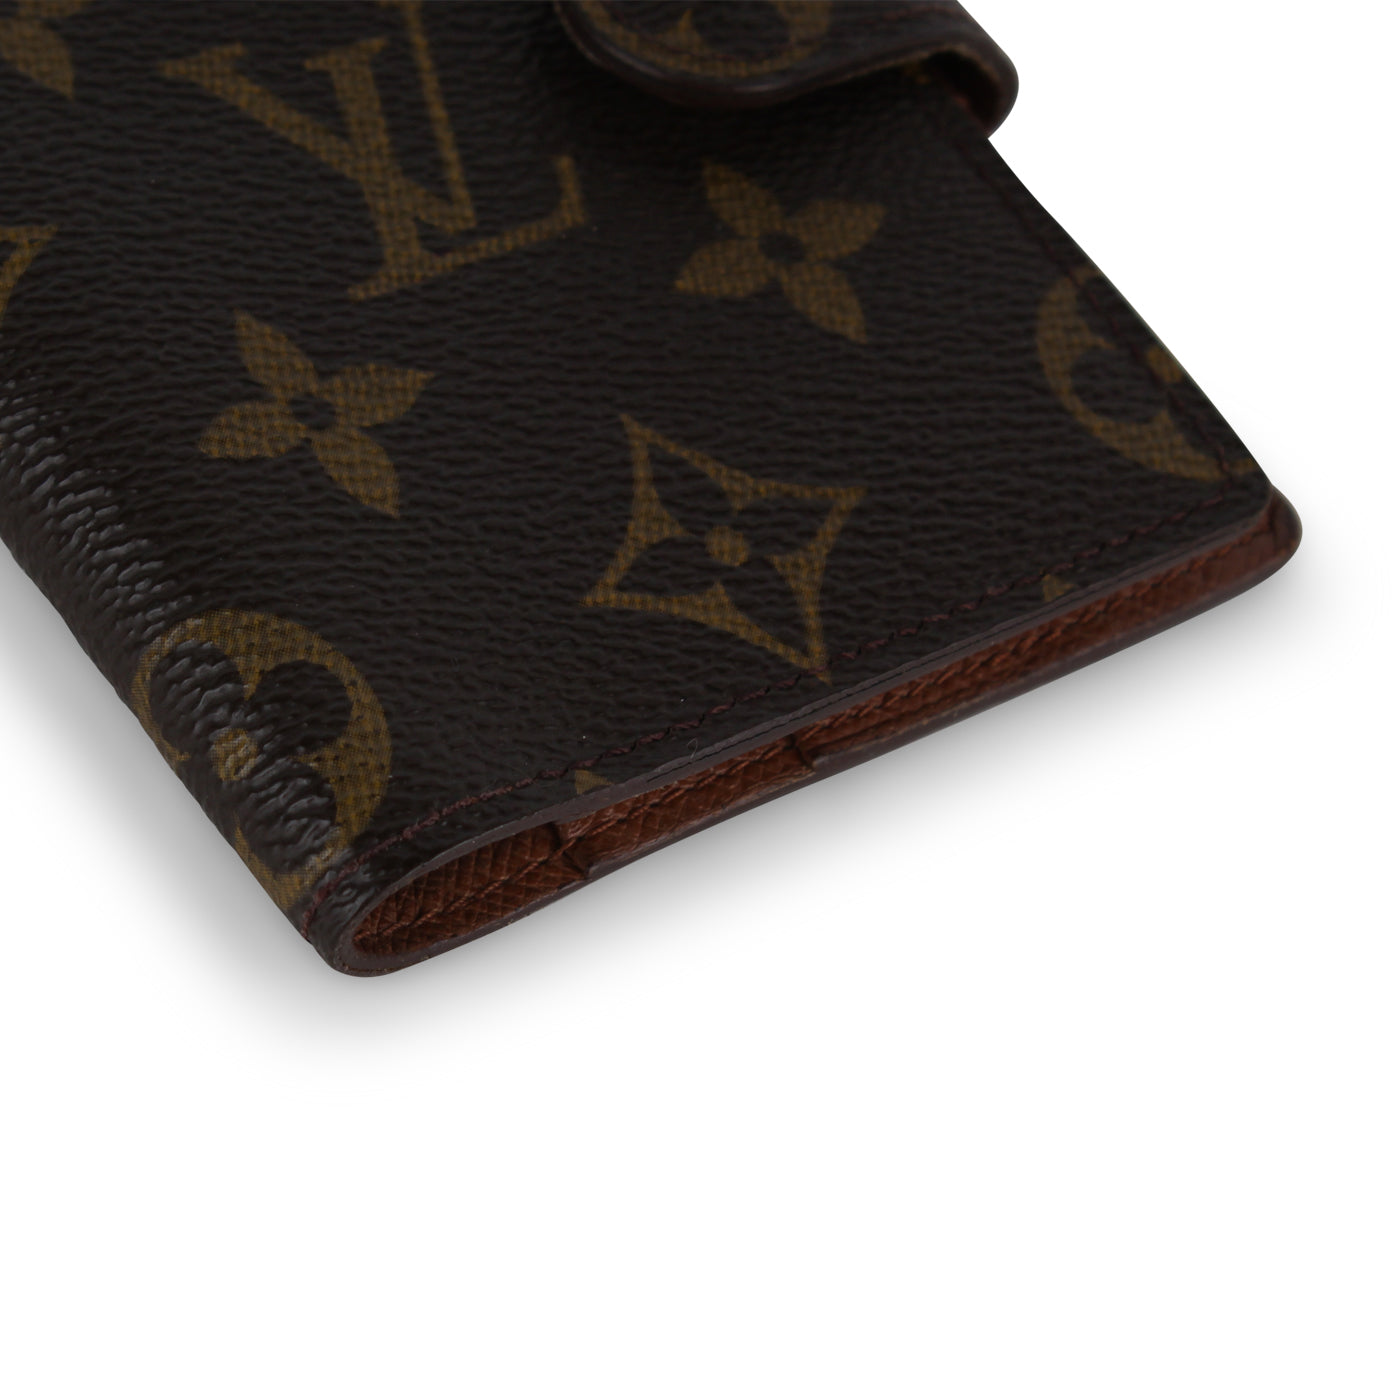 Louis Vuitton Credit Card Cardholders for Women